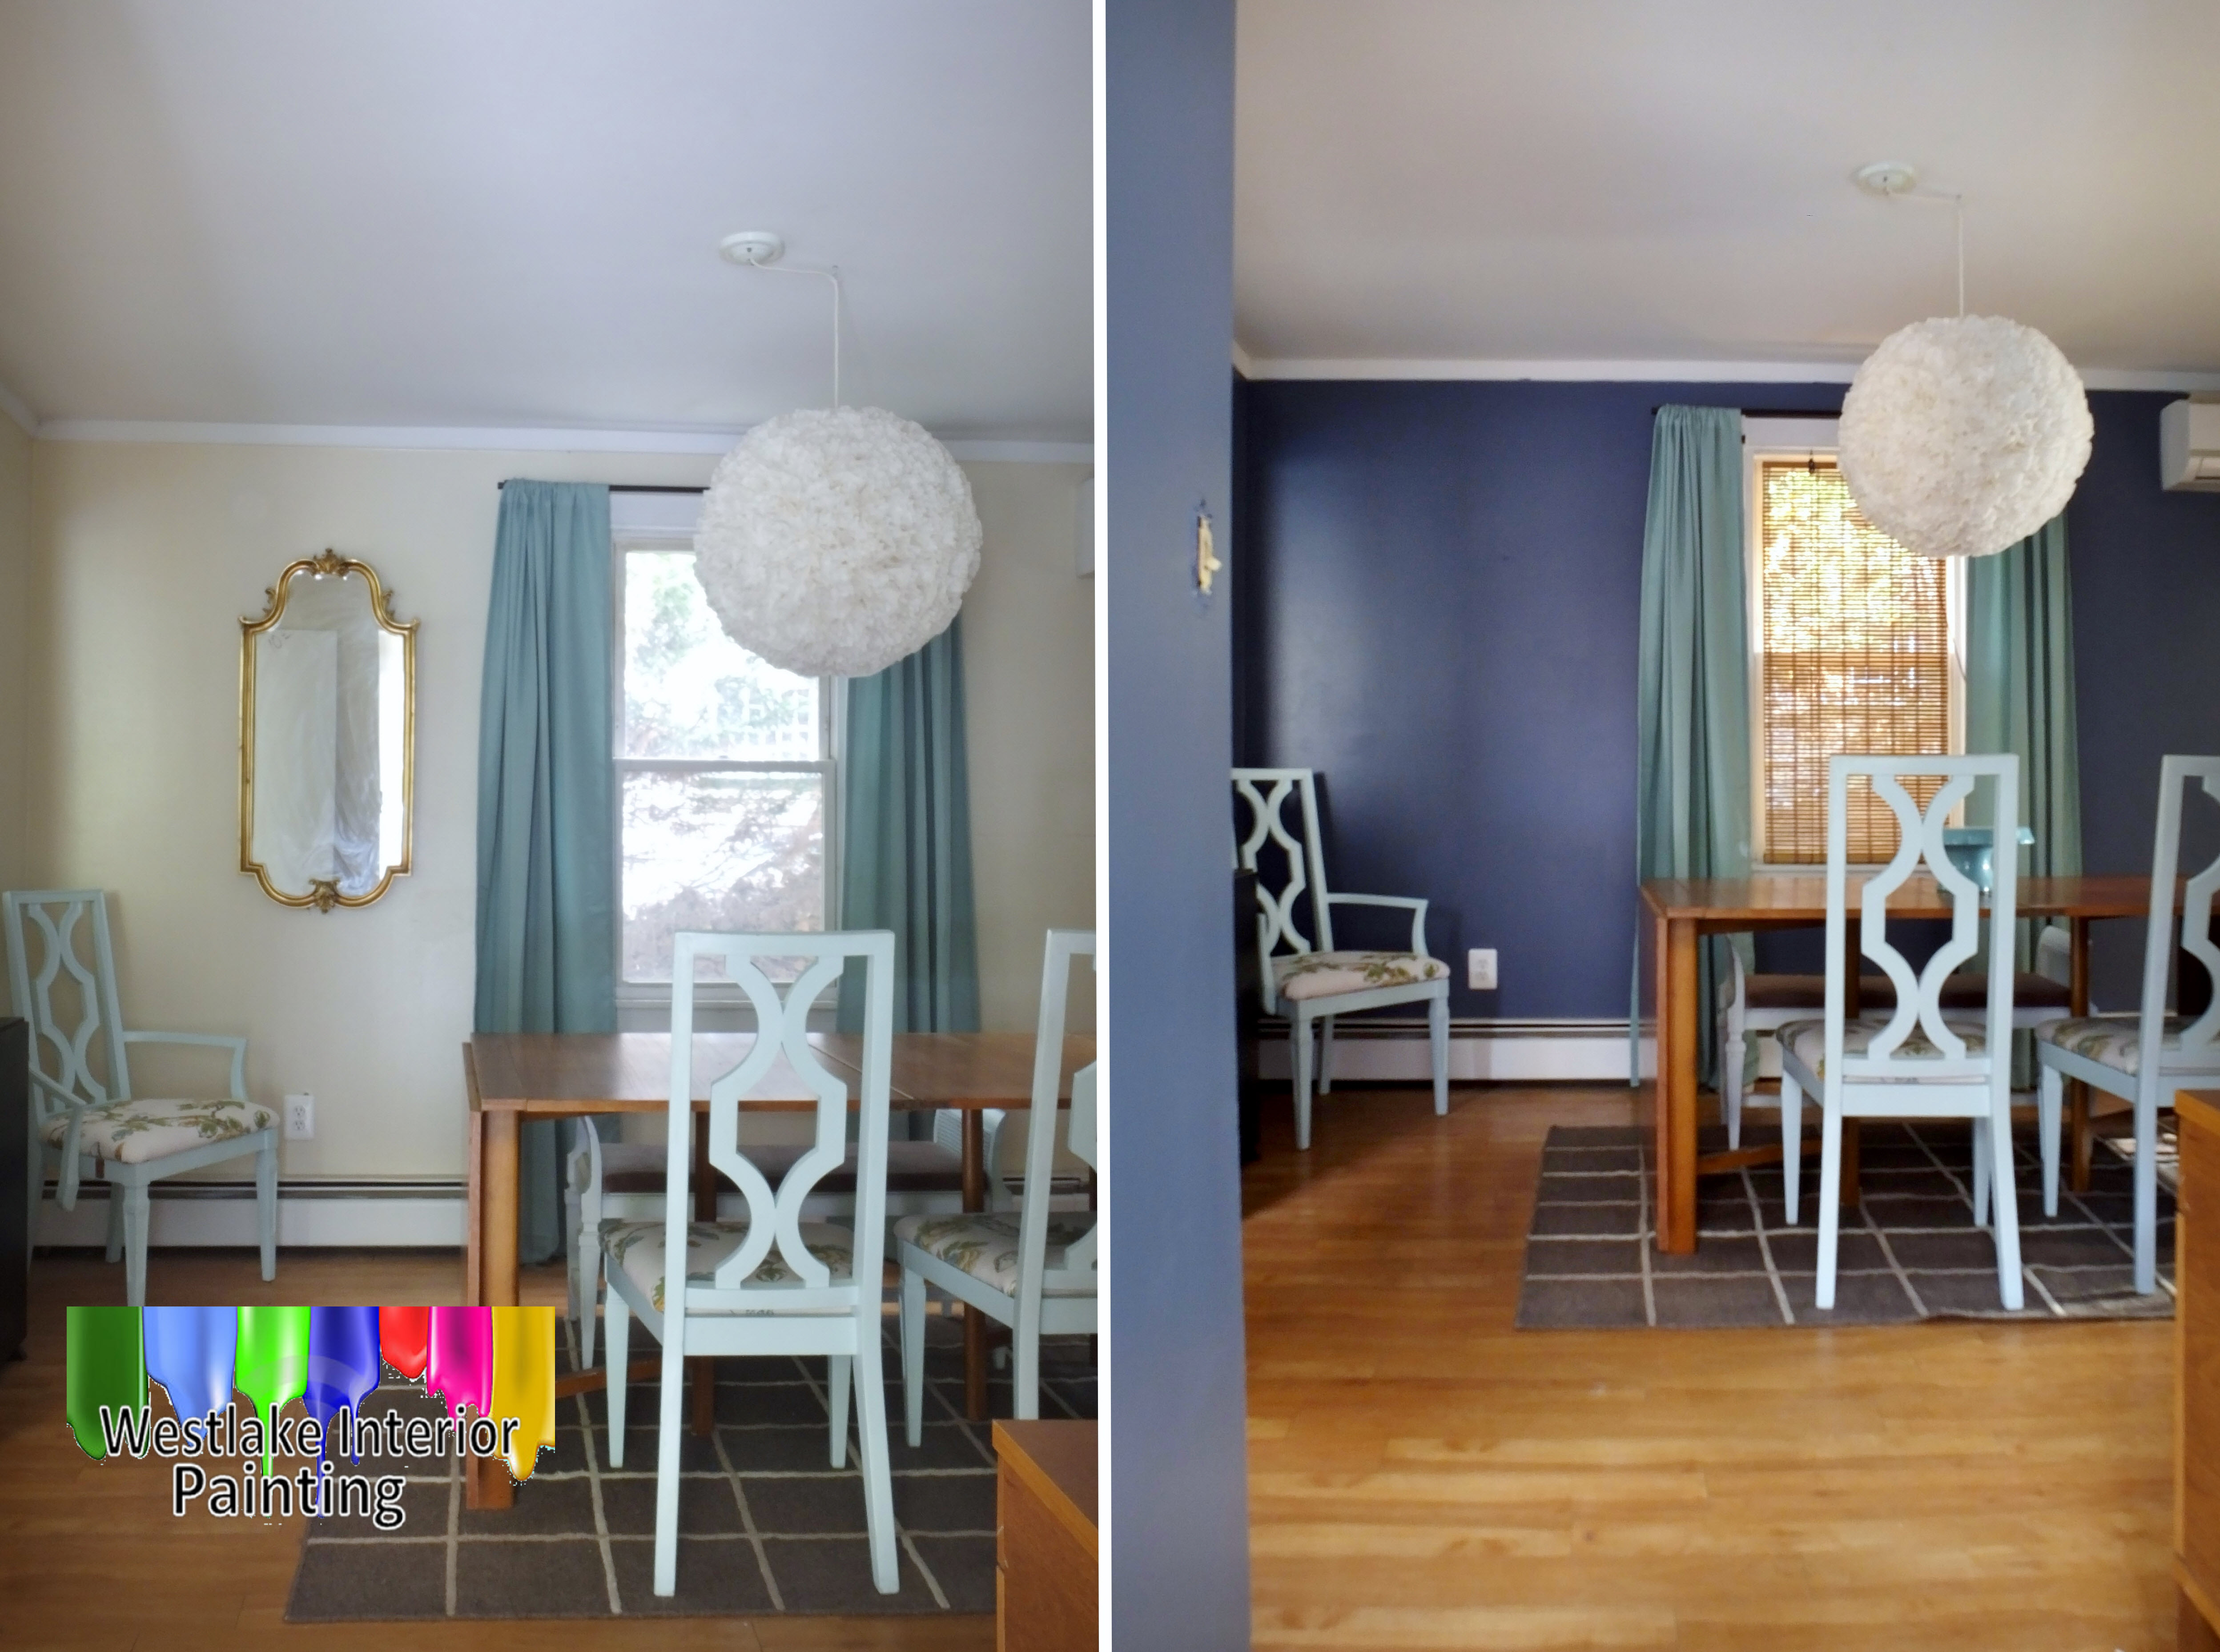 Dining room before and after